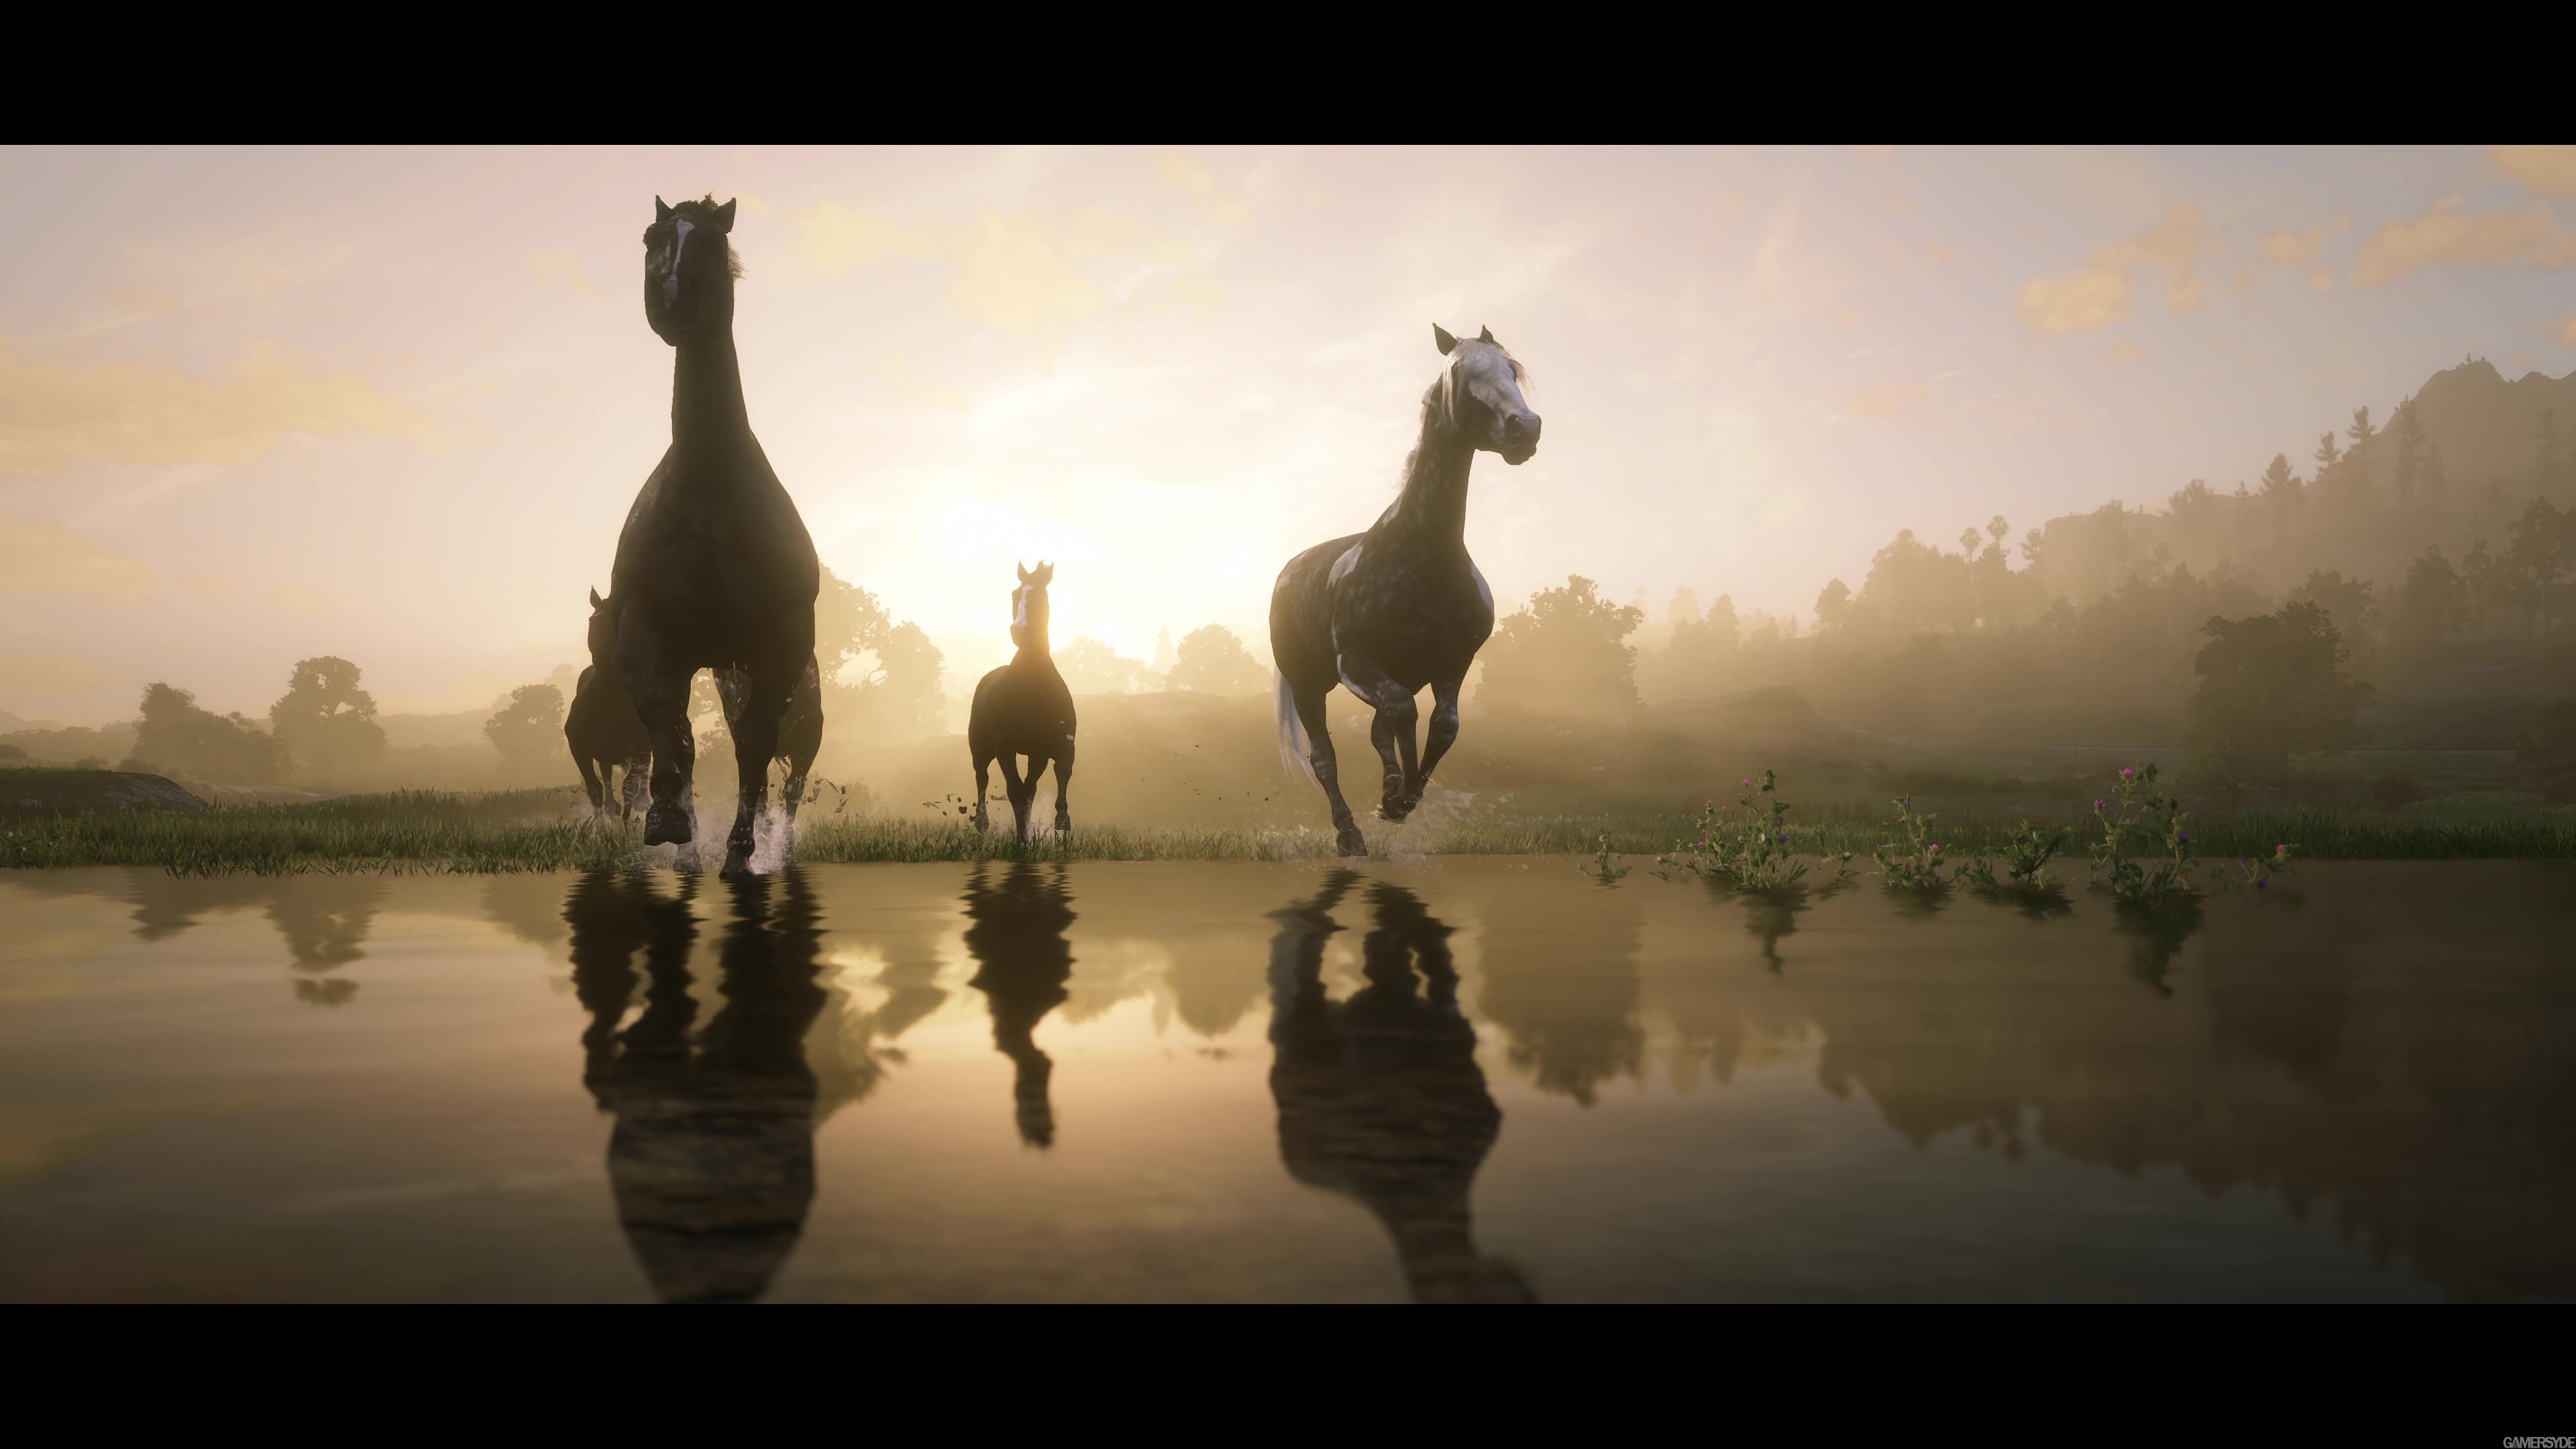 Red Dead Redemption 2 PC 4K Trailer Is Beautiful and Haunting